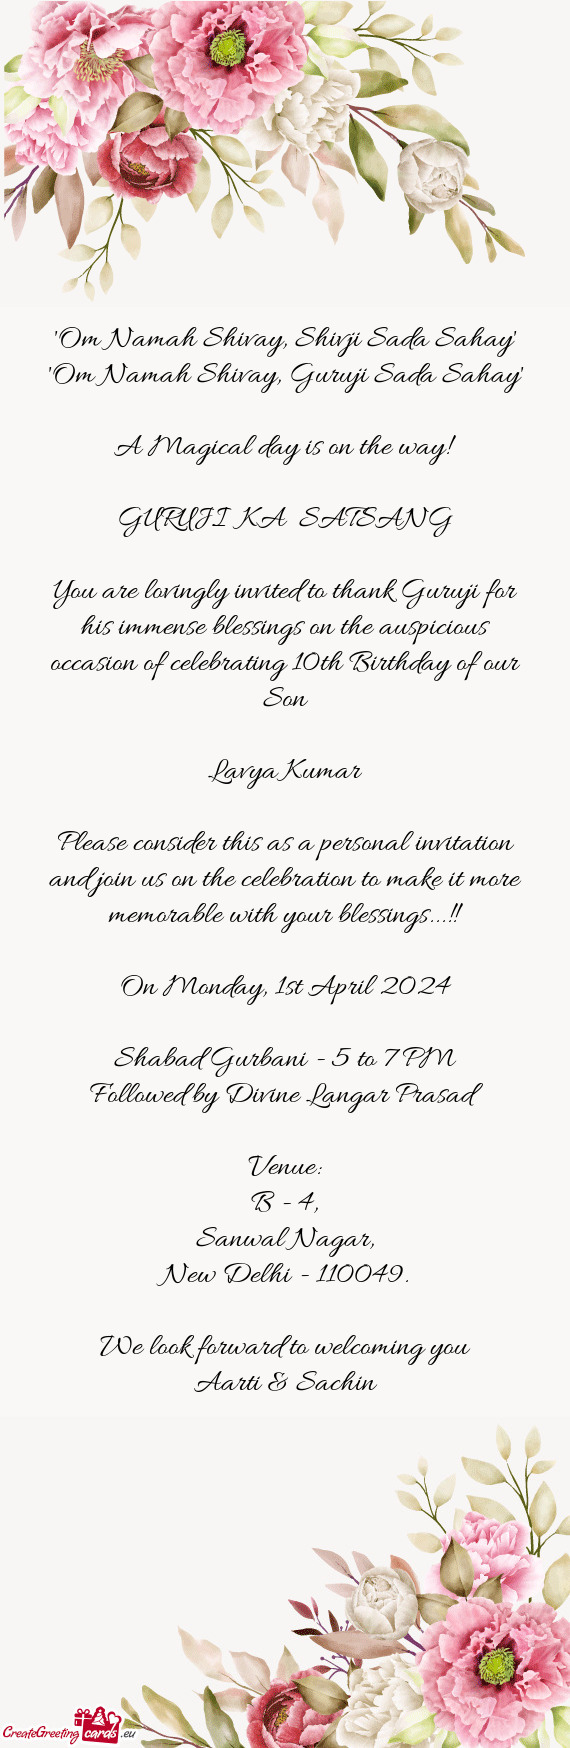 You are lovingly invited to thank Guruji for his immense blessings on the auspicious occasion of cel